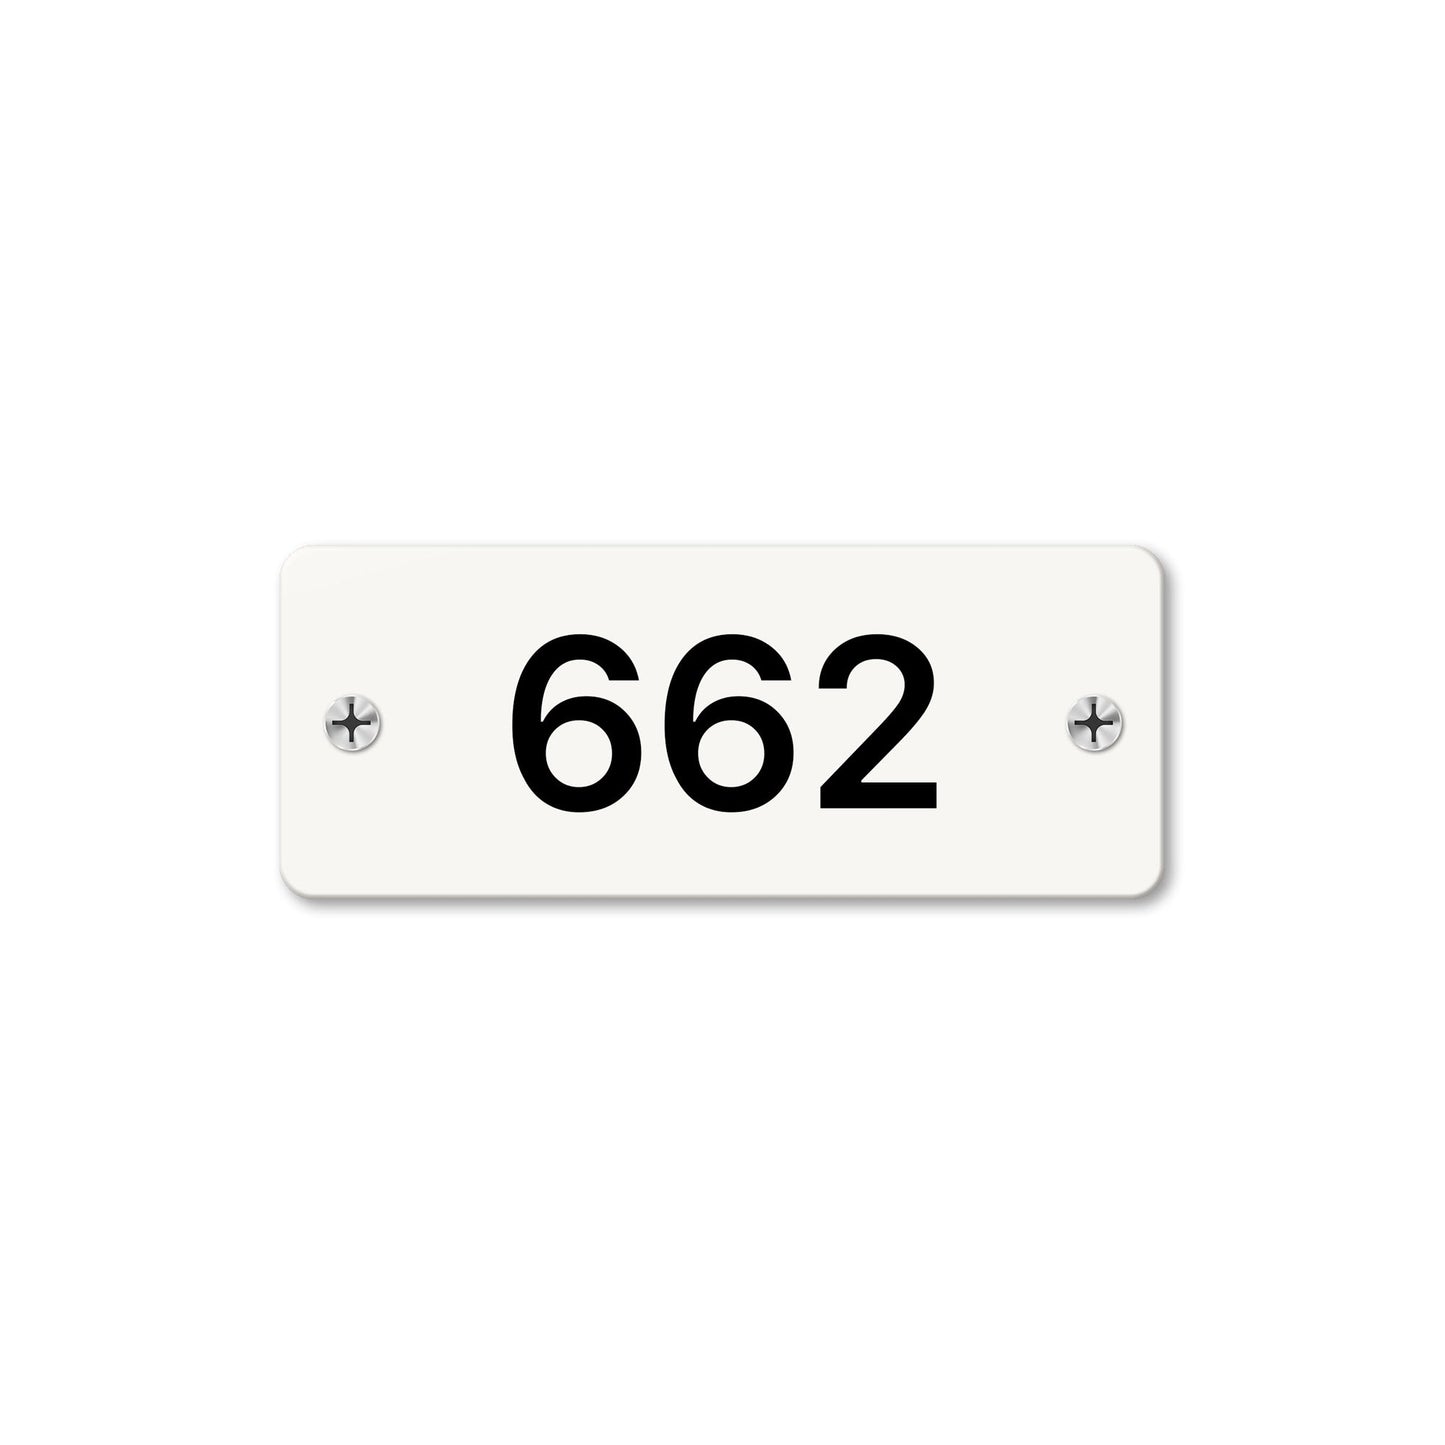 Numeral 662